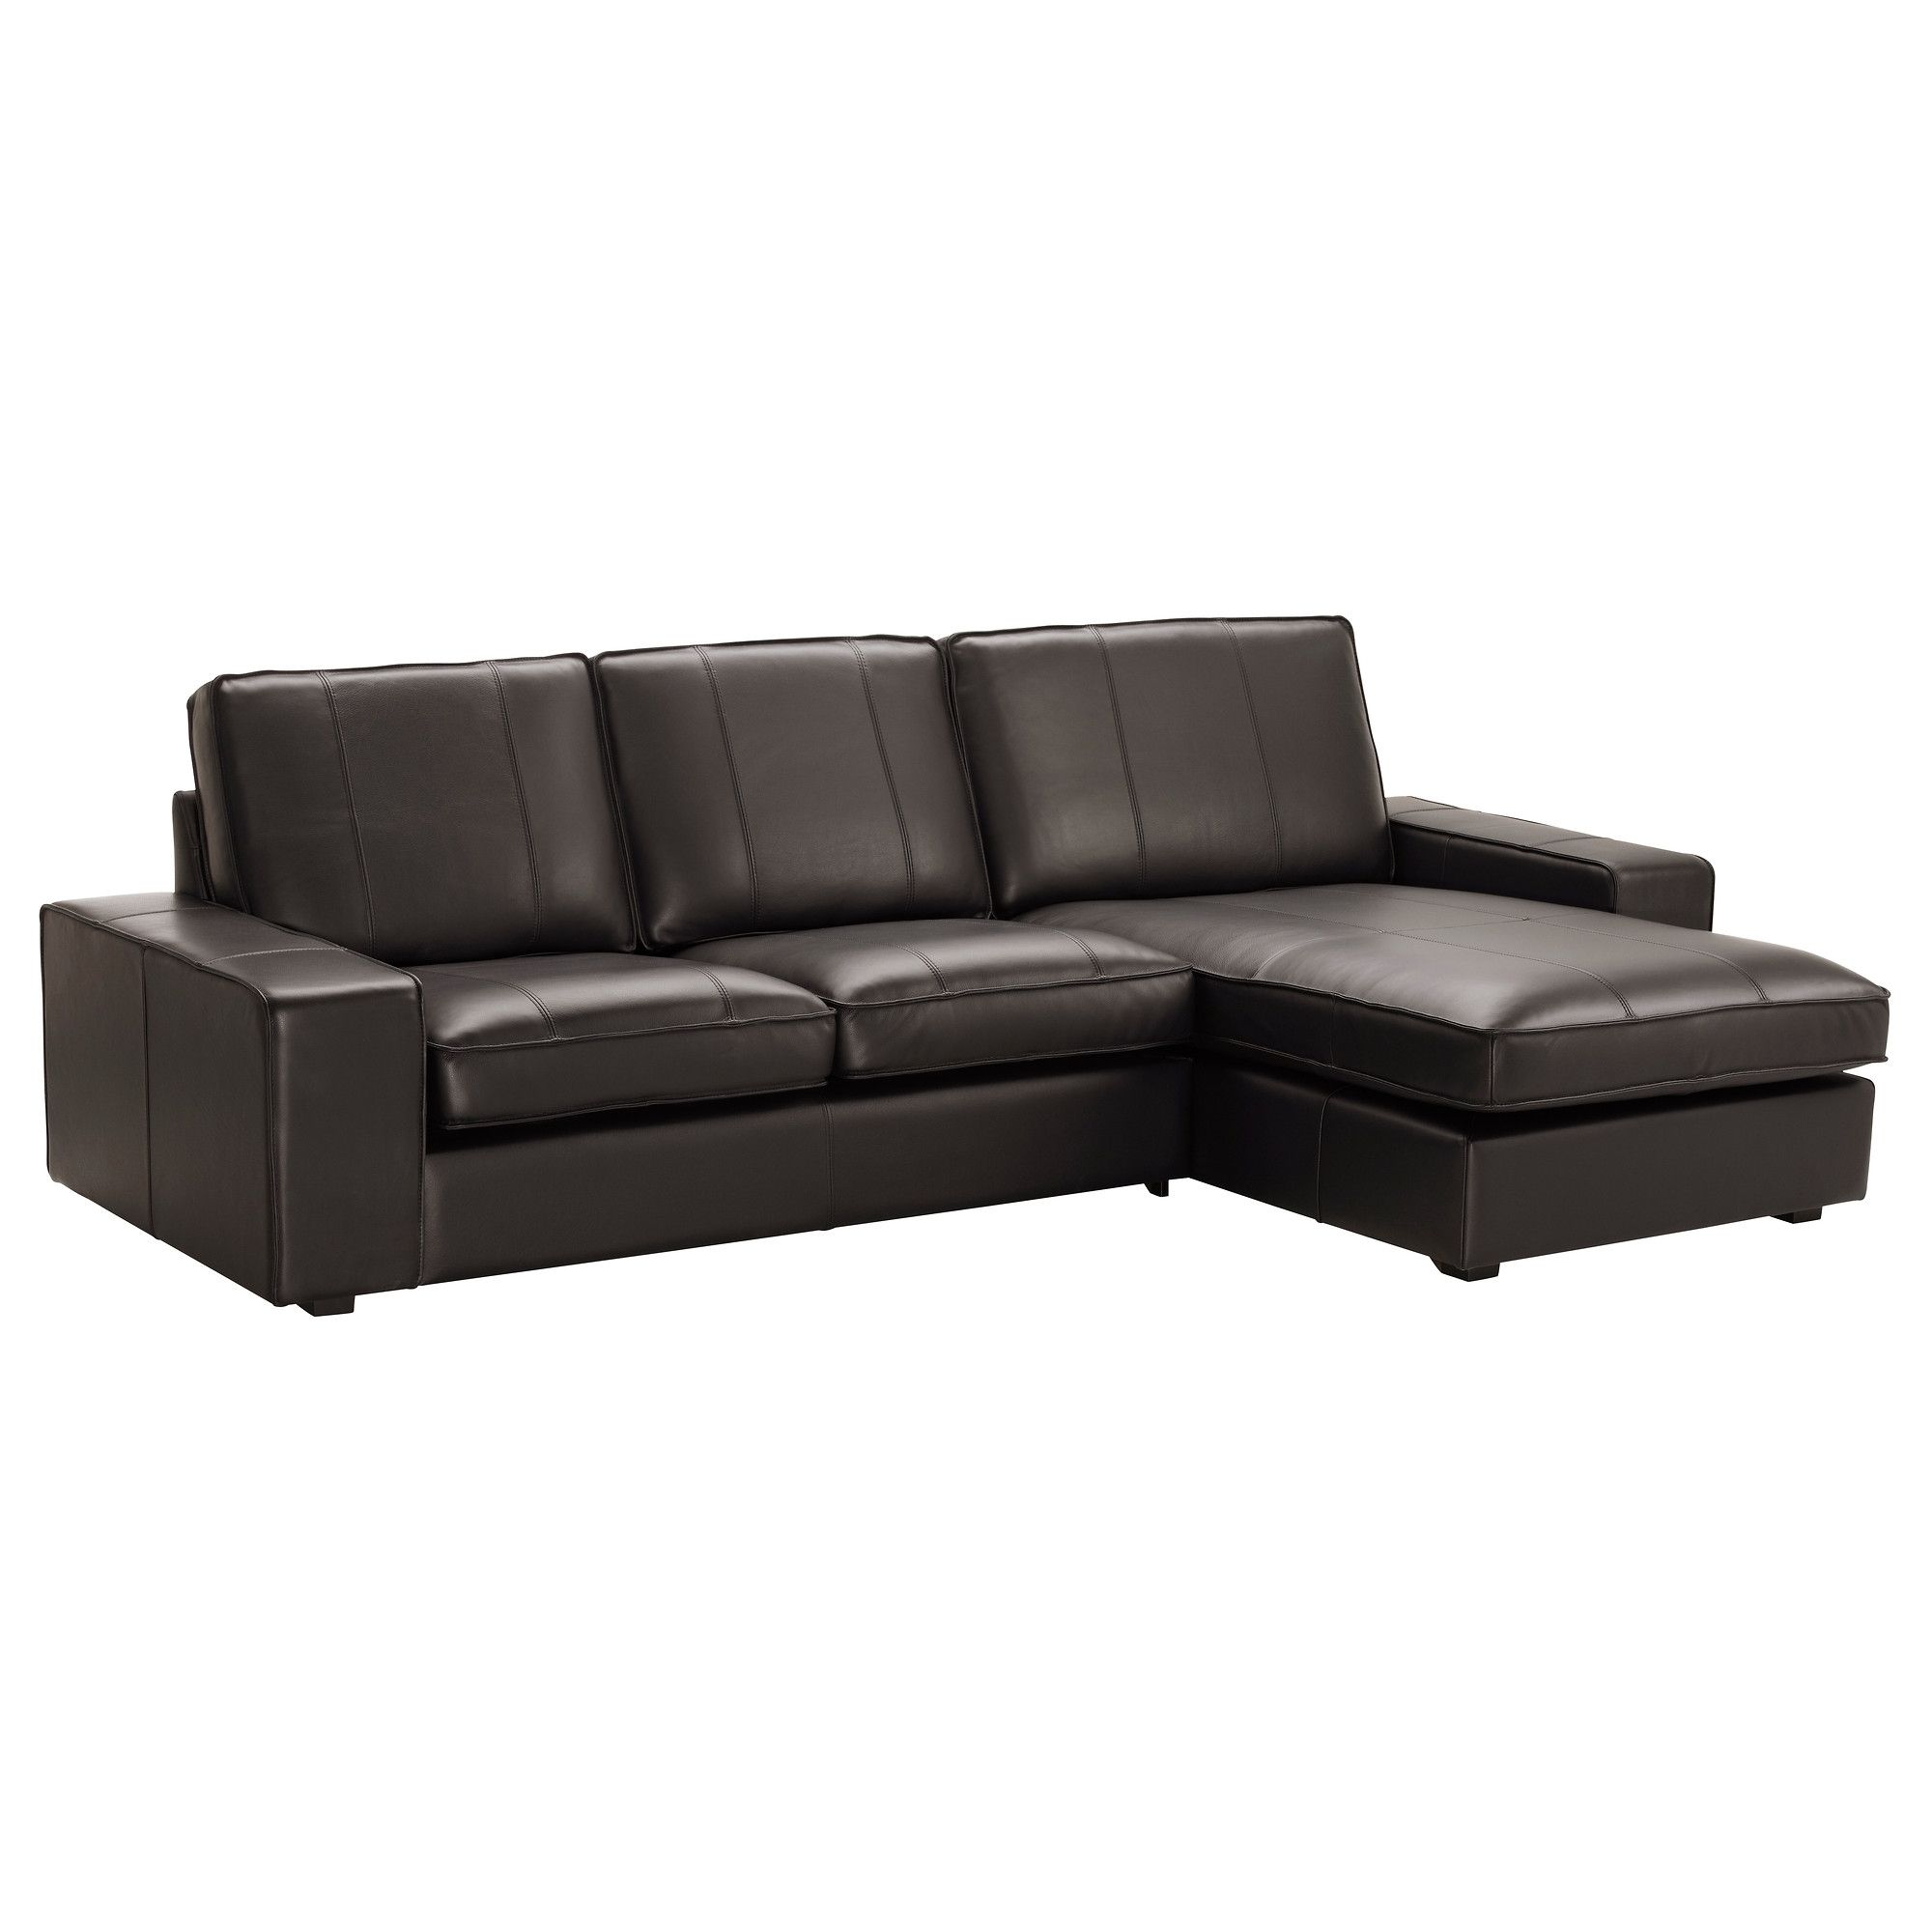 Sectional Sofas At Ikea Intended For Favorite Kivik Sofa – With Chaise/grann/bomstad Black – Ikea (View 2 of 15)